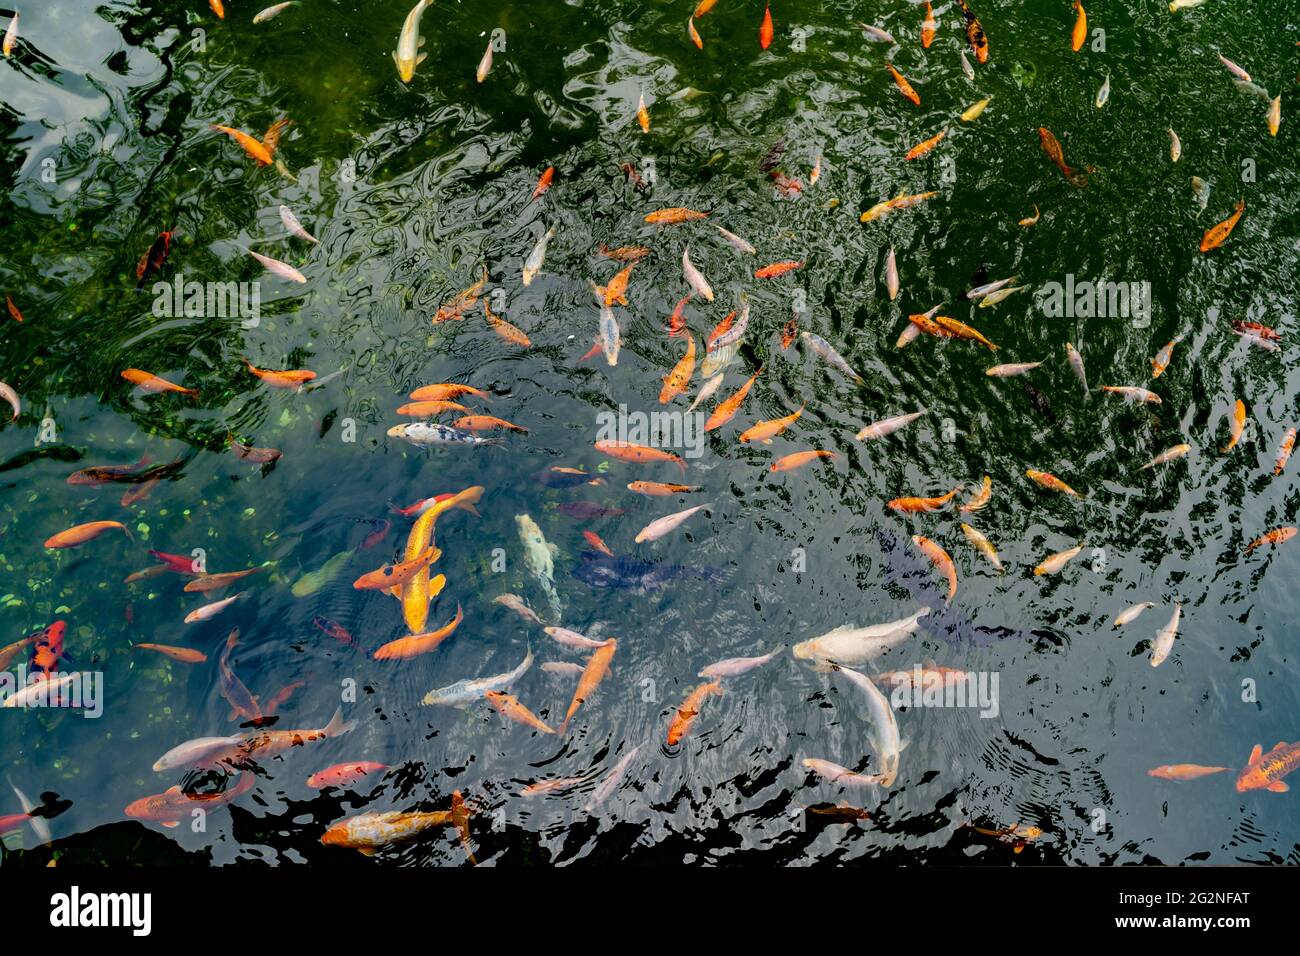 Pond with carps top view. Many colorful fish of different sizes